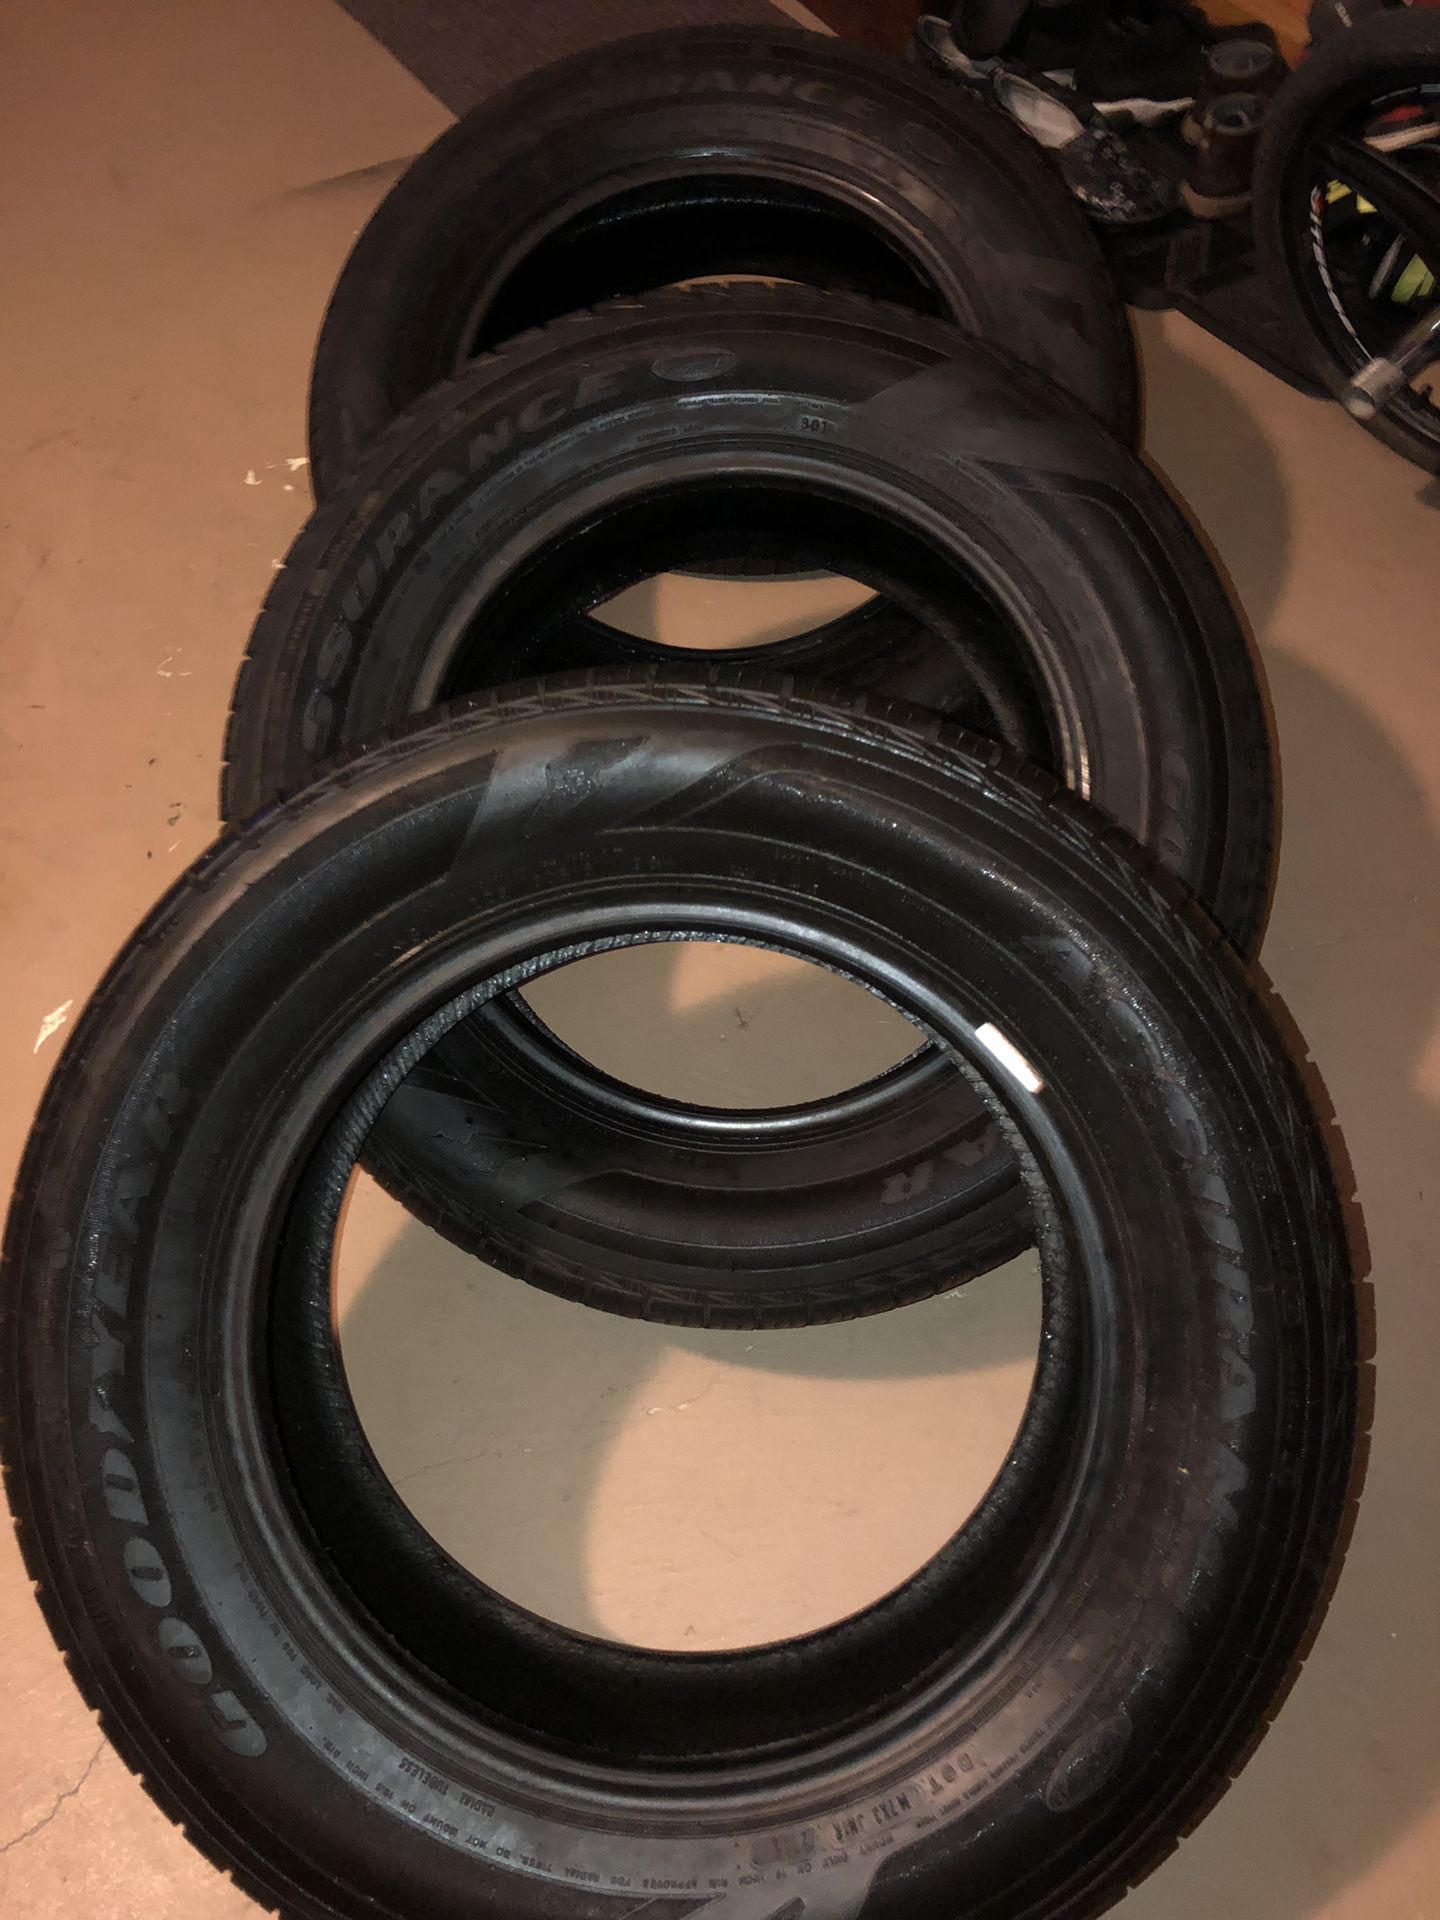 (Reduced price)4 Goodyear tires (price reduced)